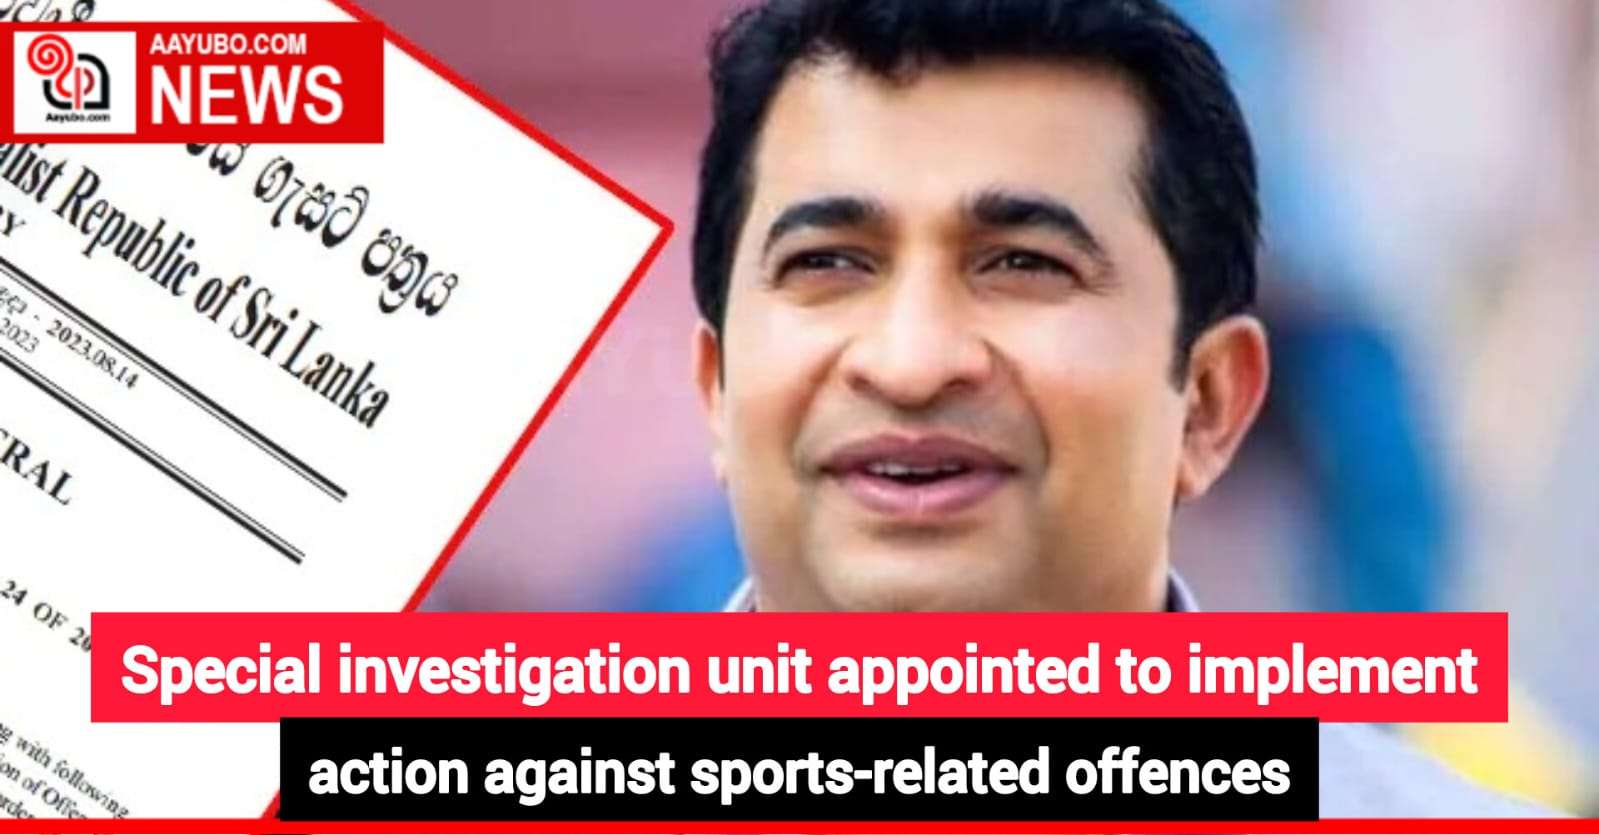 Special investigation unit appointed to implement action against sports-related offences